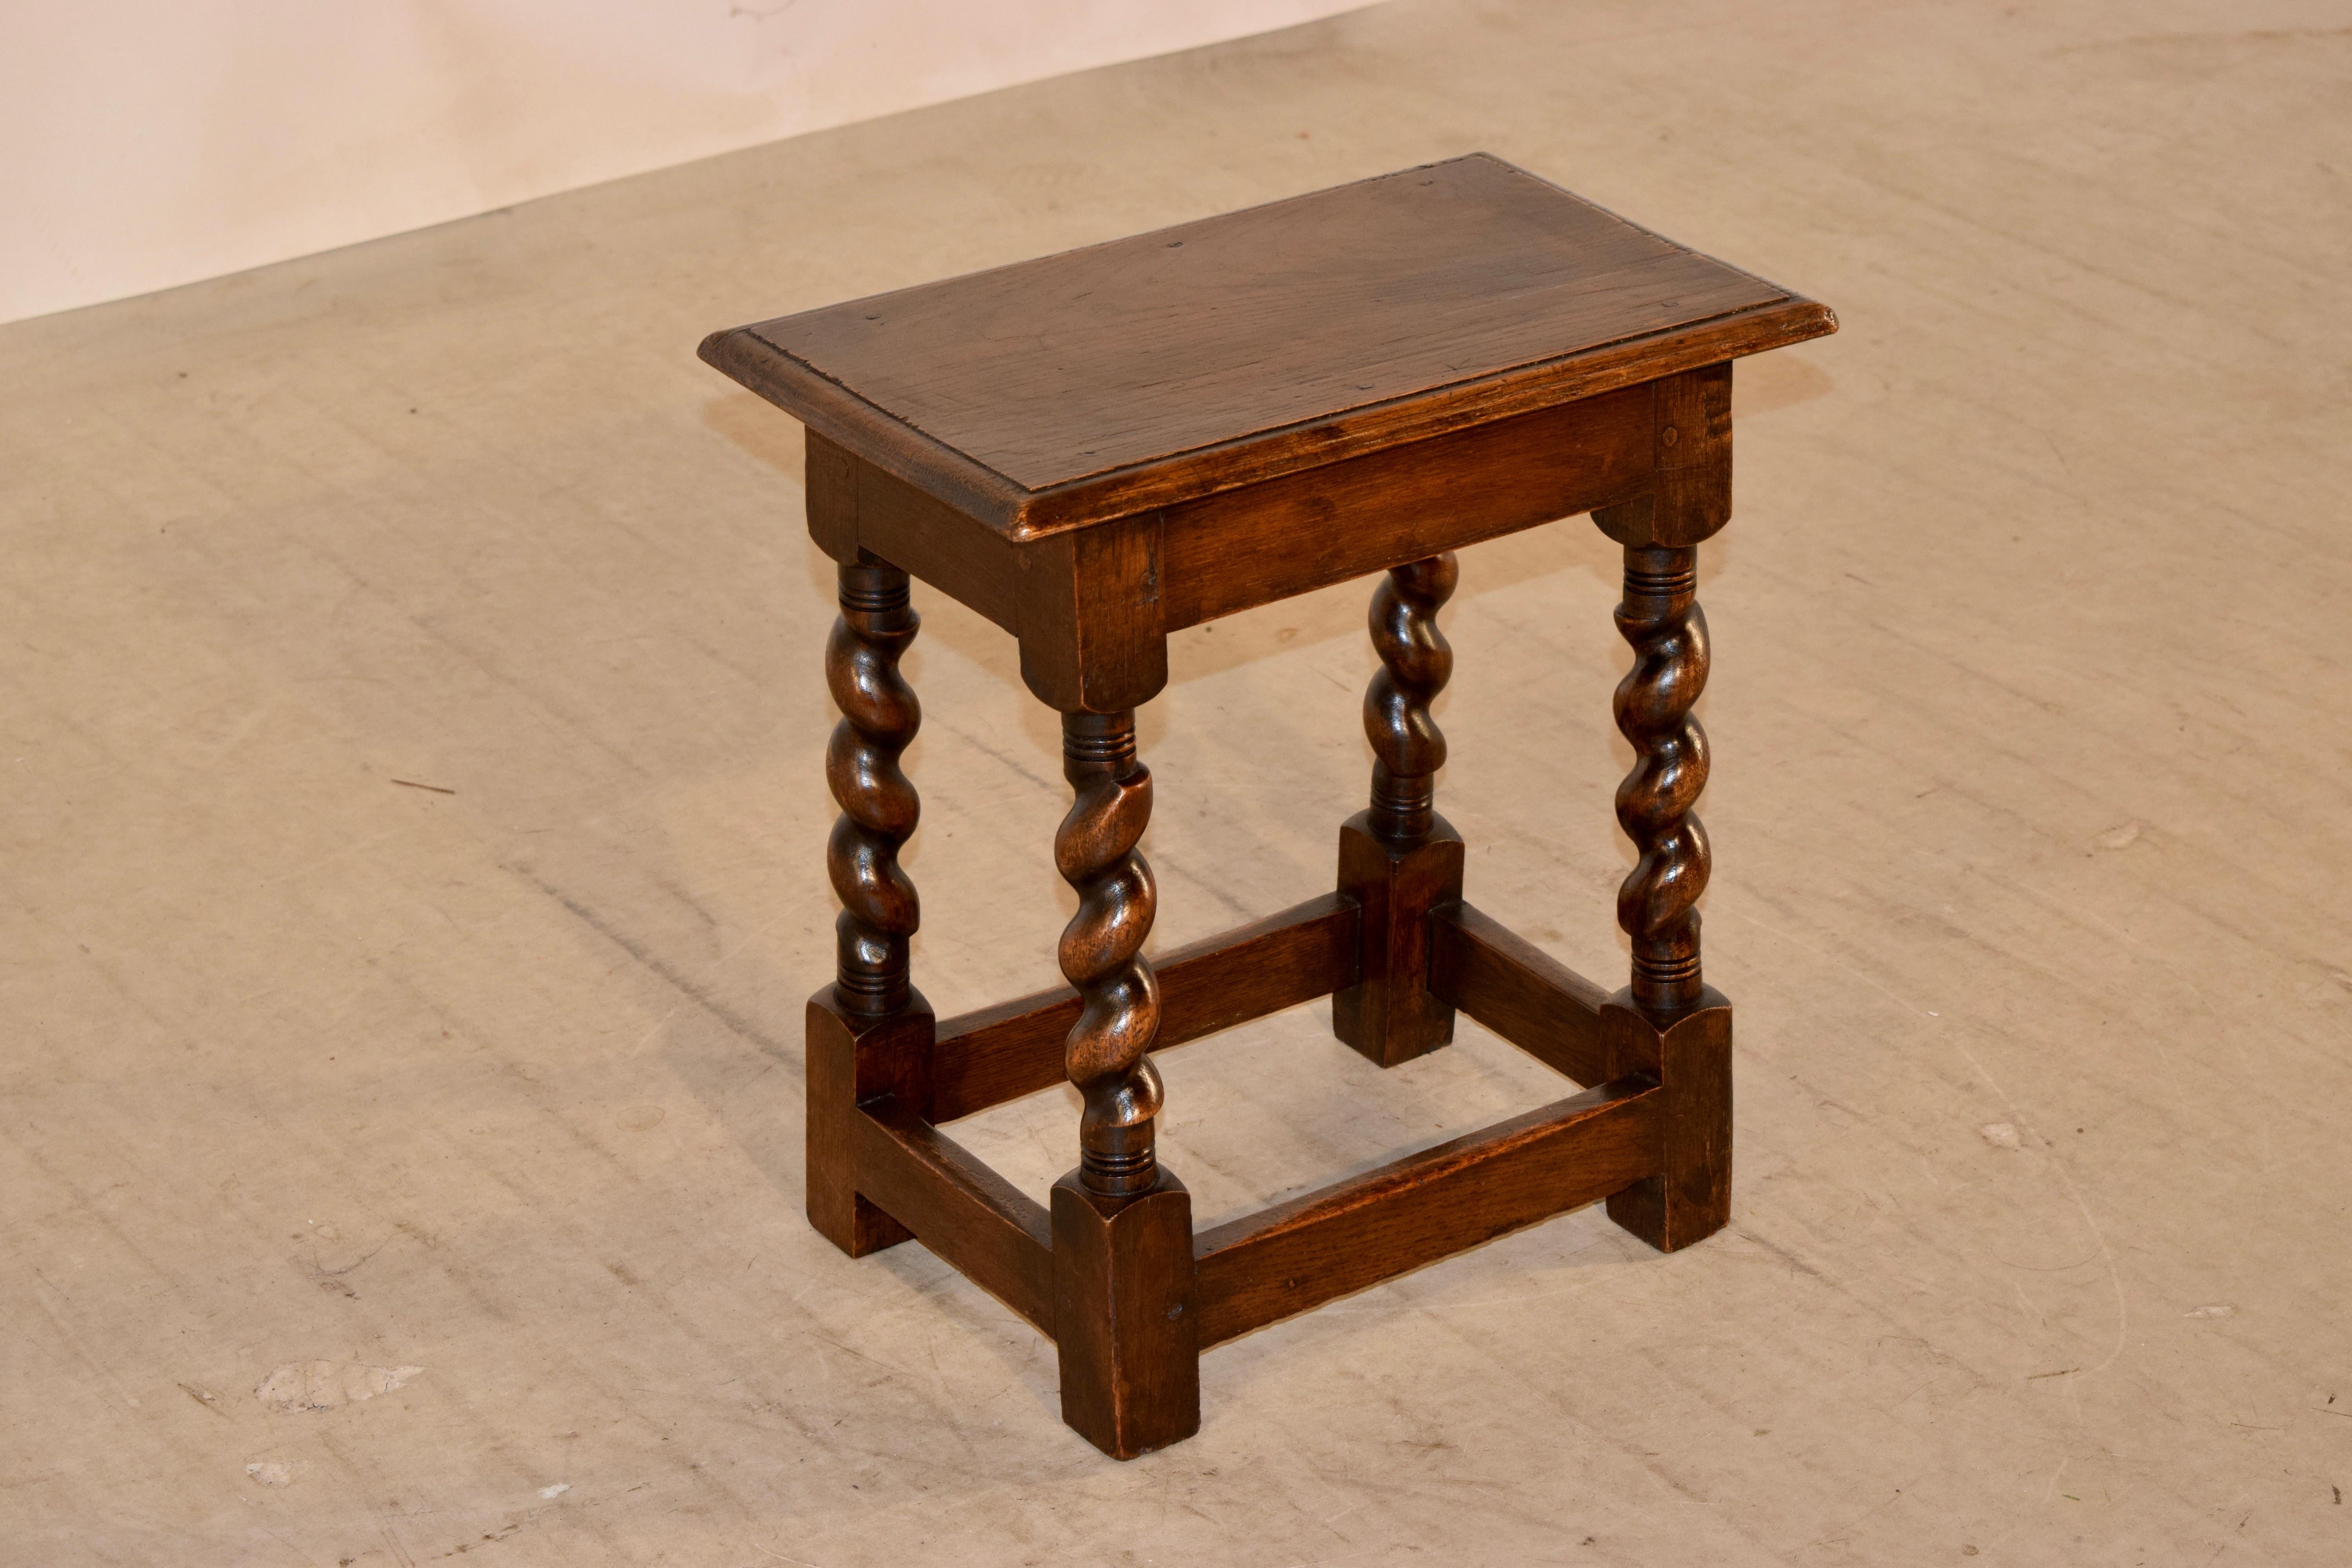 Edwardian English oak joint stool with a beveled edge around the top and simple apron, supported on hand-turned barley twist legs, joined by simple stretchers.